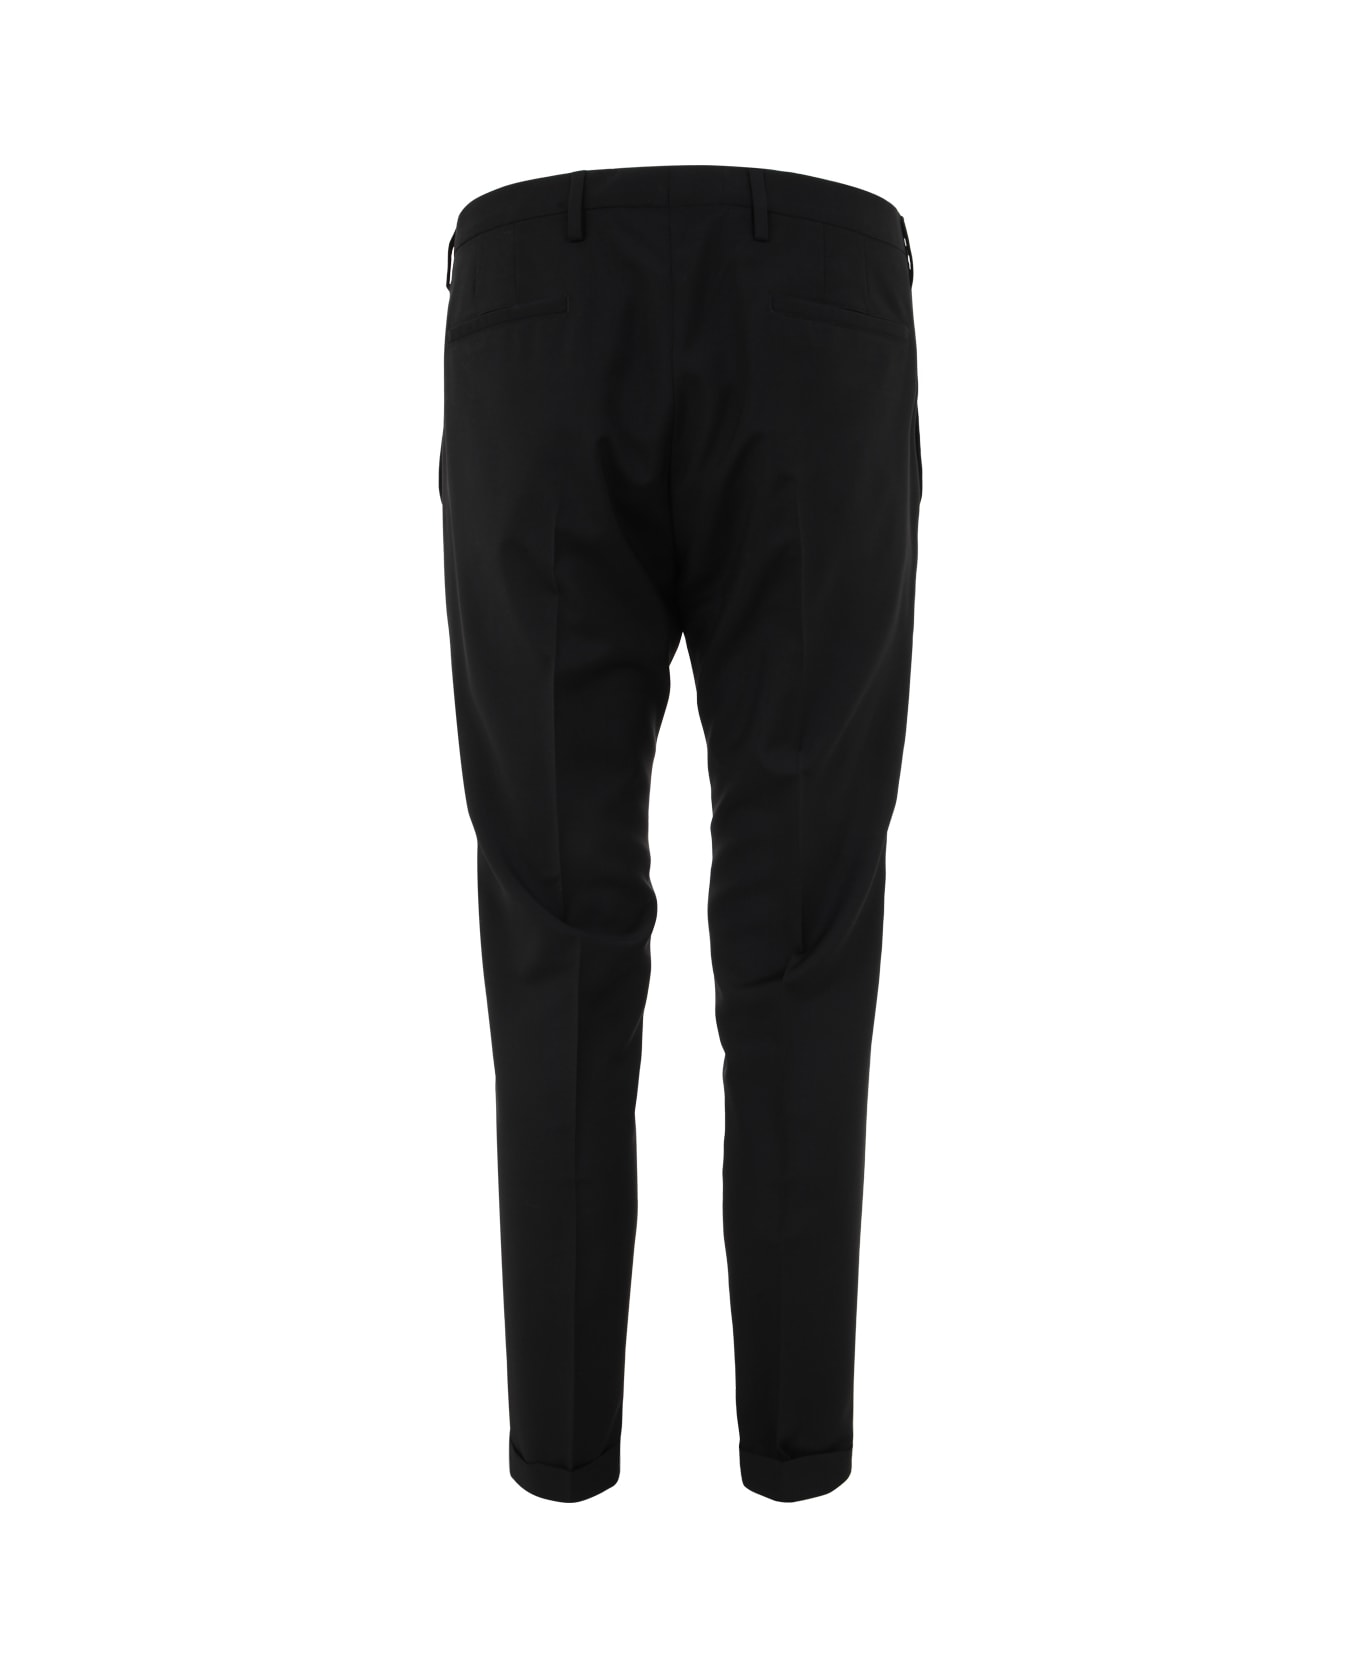 Paul Smith Mens Trousers - Black